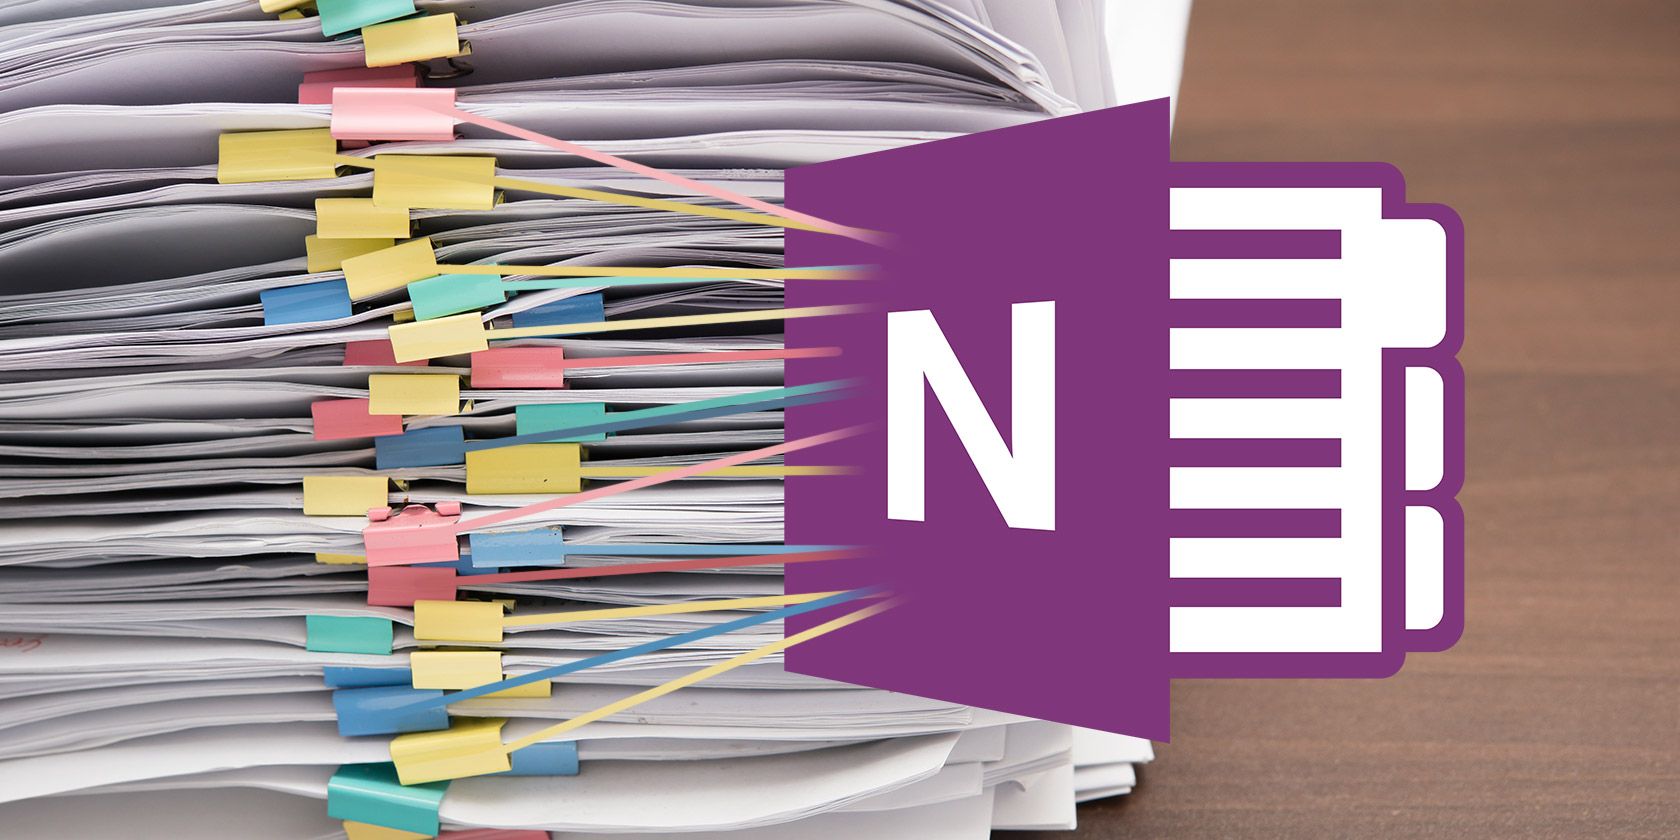 How to Use Wiki Linking in OneNote 